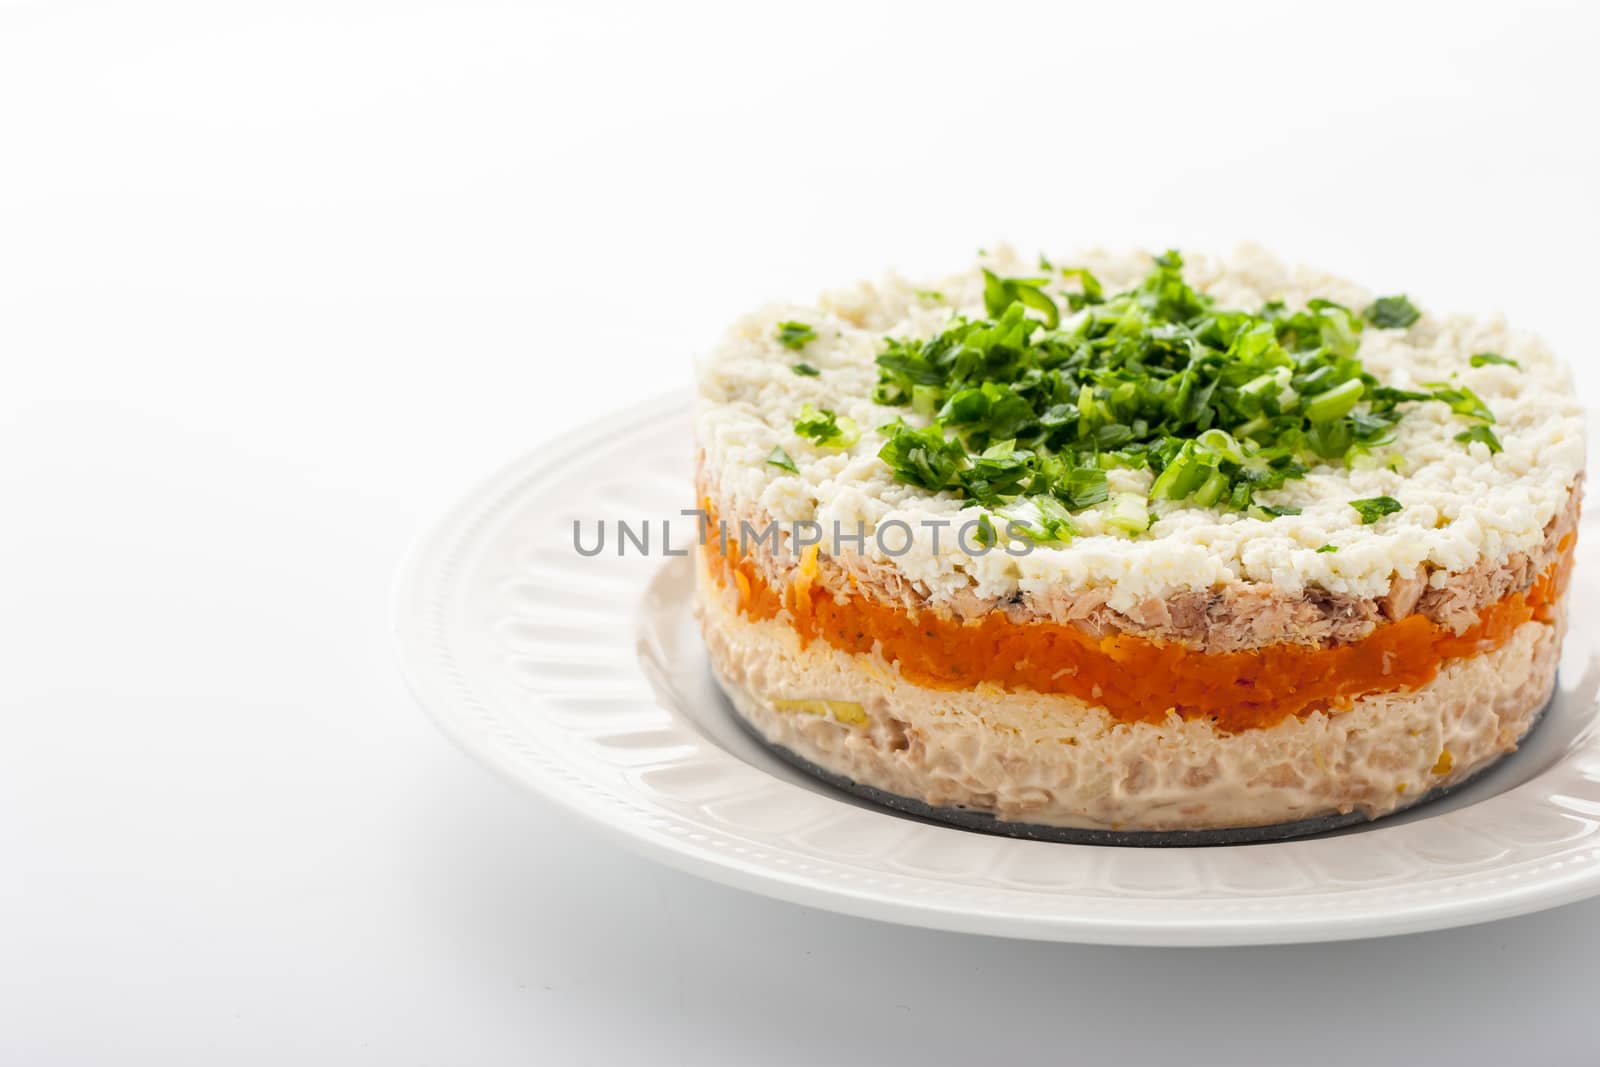 Layered salad with eggs and fish on the white ceramic plate horizontal